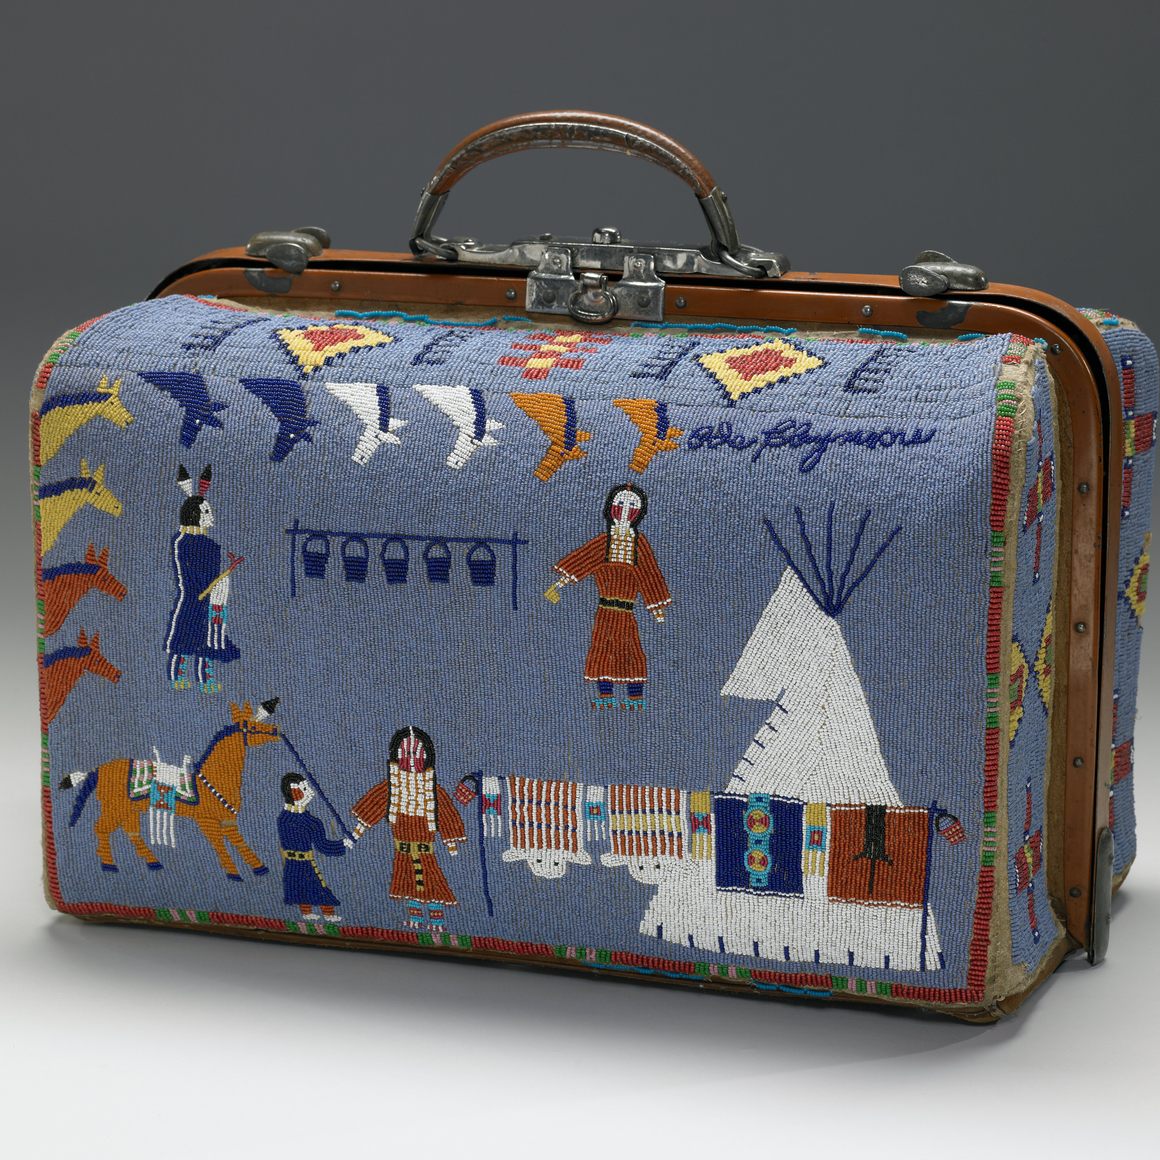 Nellie Two Bear Gates. Suitcase, 1880–1910. Beads, hide, metal, oilcloth, thread, 12 1/2 x 17 11/16 x 10 1/4 in. (Collection of Minneapolis Institute of Art, Minneapolis, MN.)